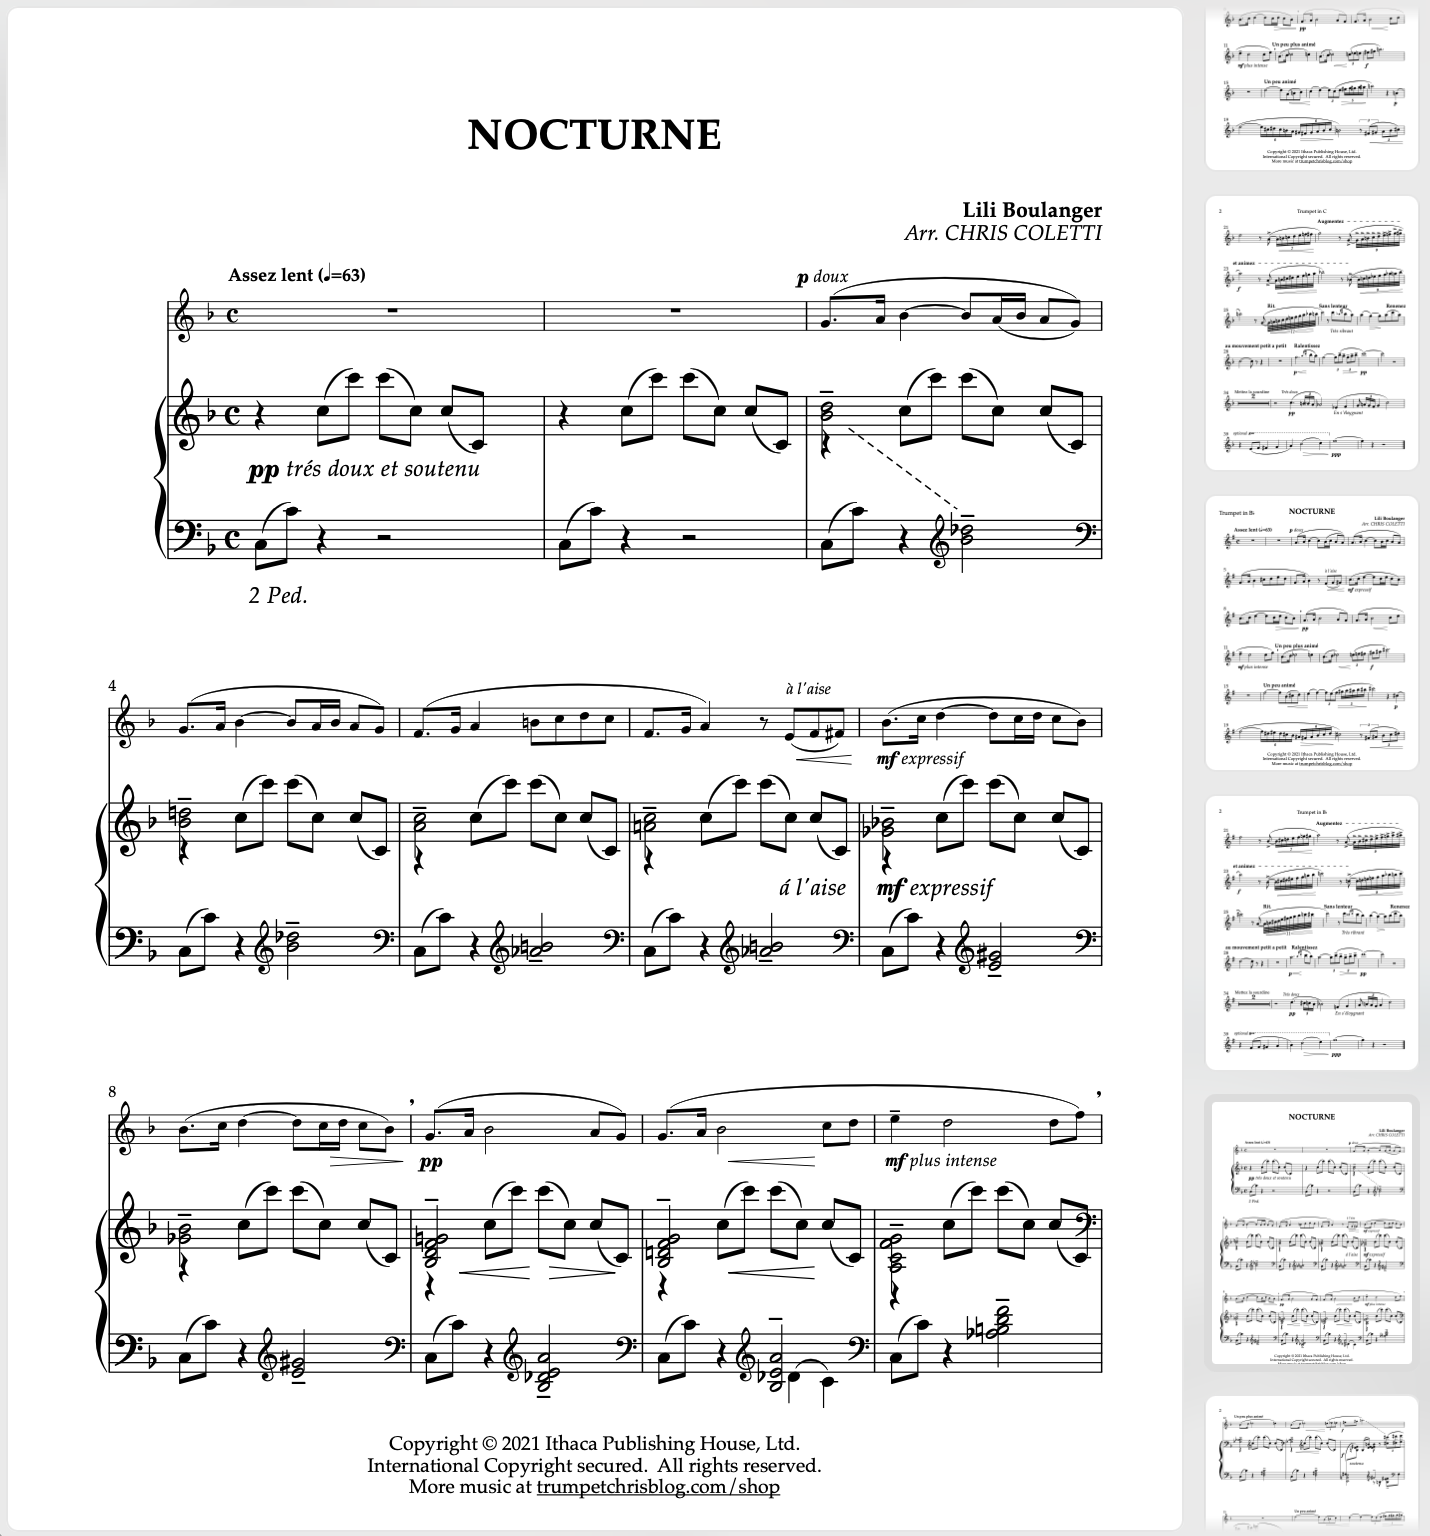 NOCTURNE for and Piano by Lili Boulanger / Chris Coletti — COLETTI | TRUMPET